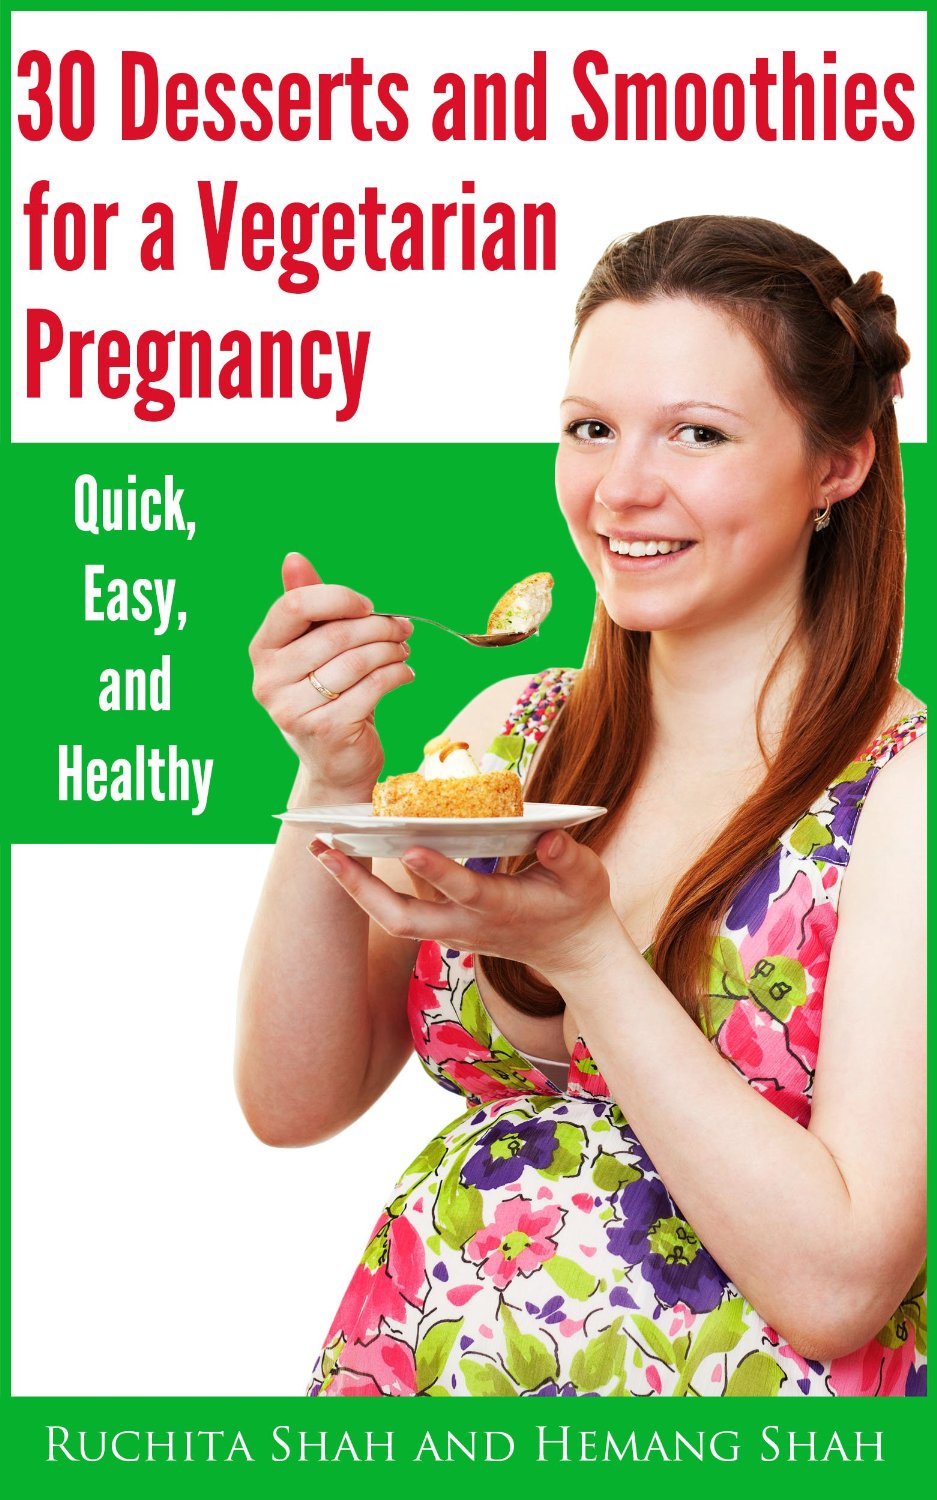 30 Desserts and Smoothies for a Vegetarian Pregnancy by Hemang Shah & Ruchita Shah